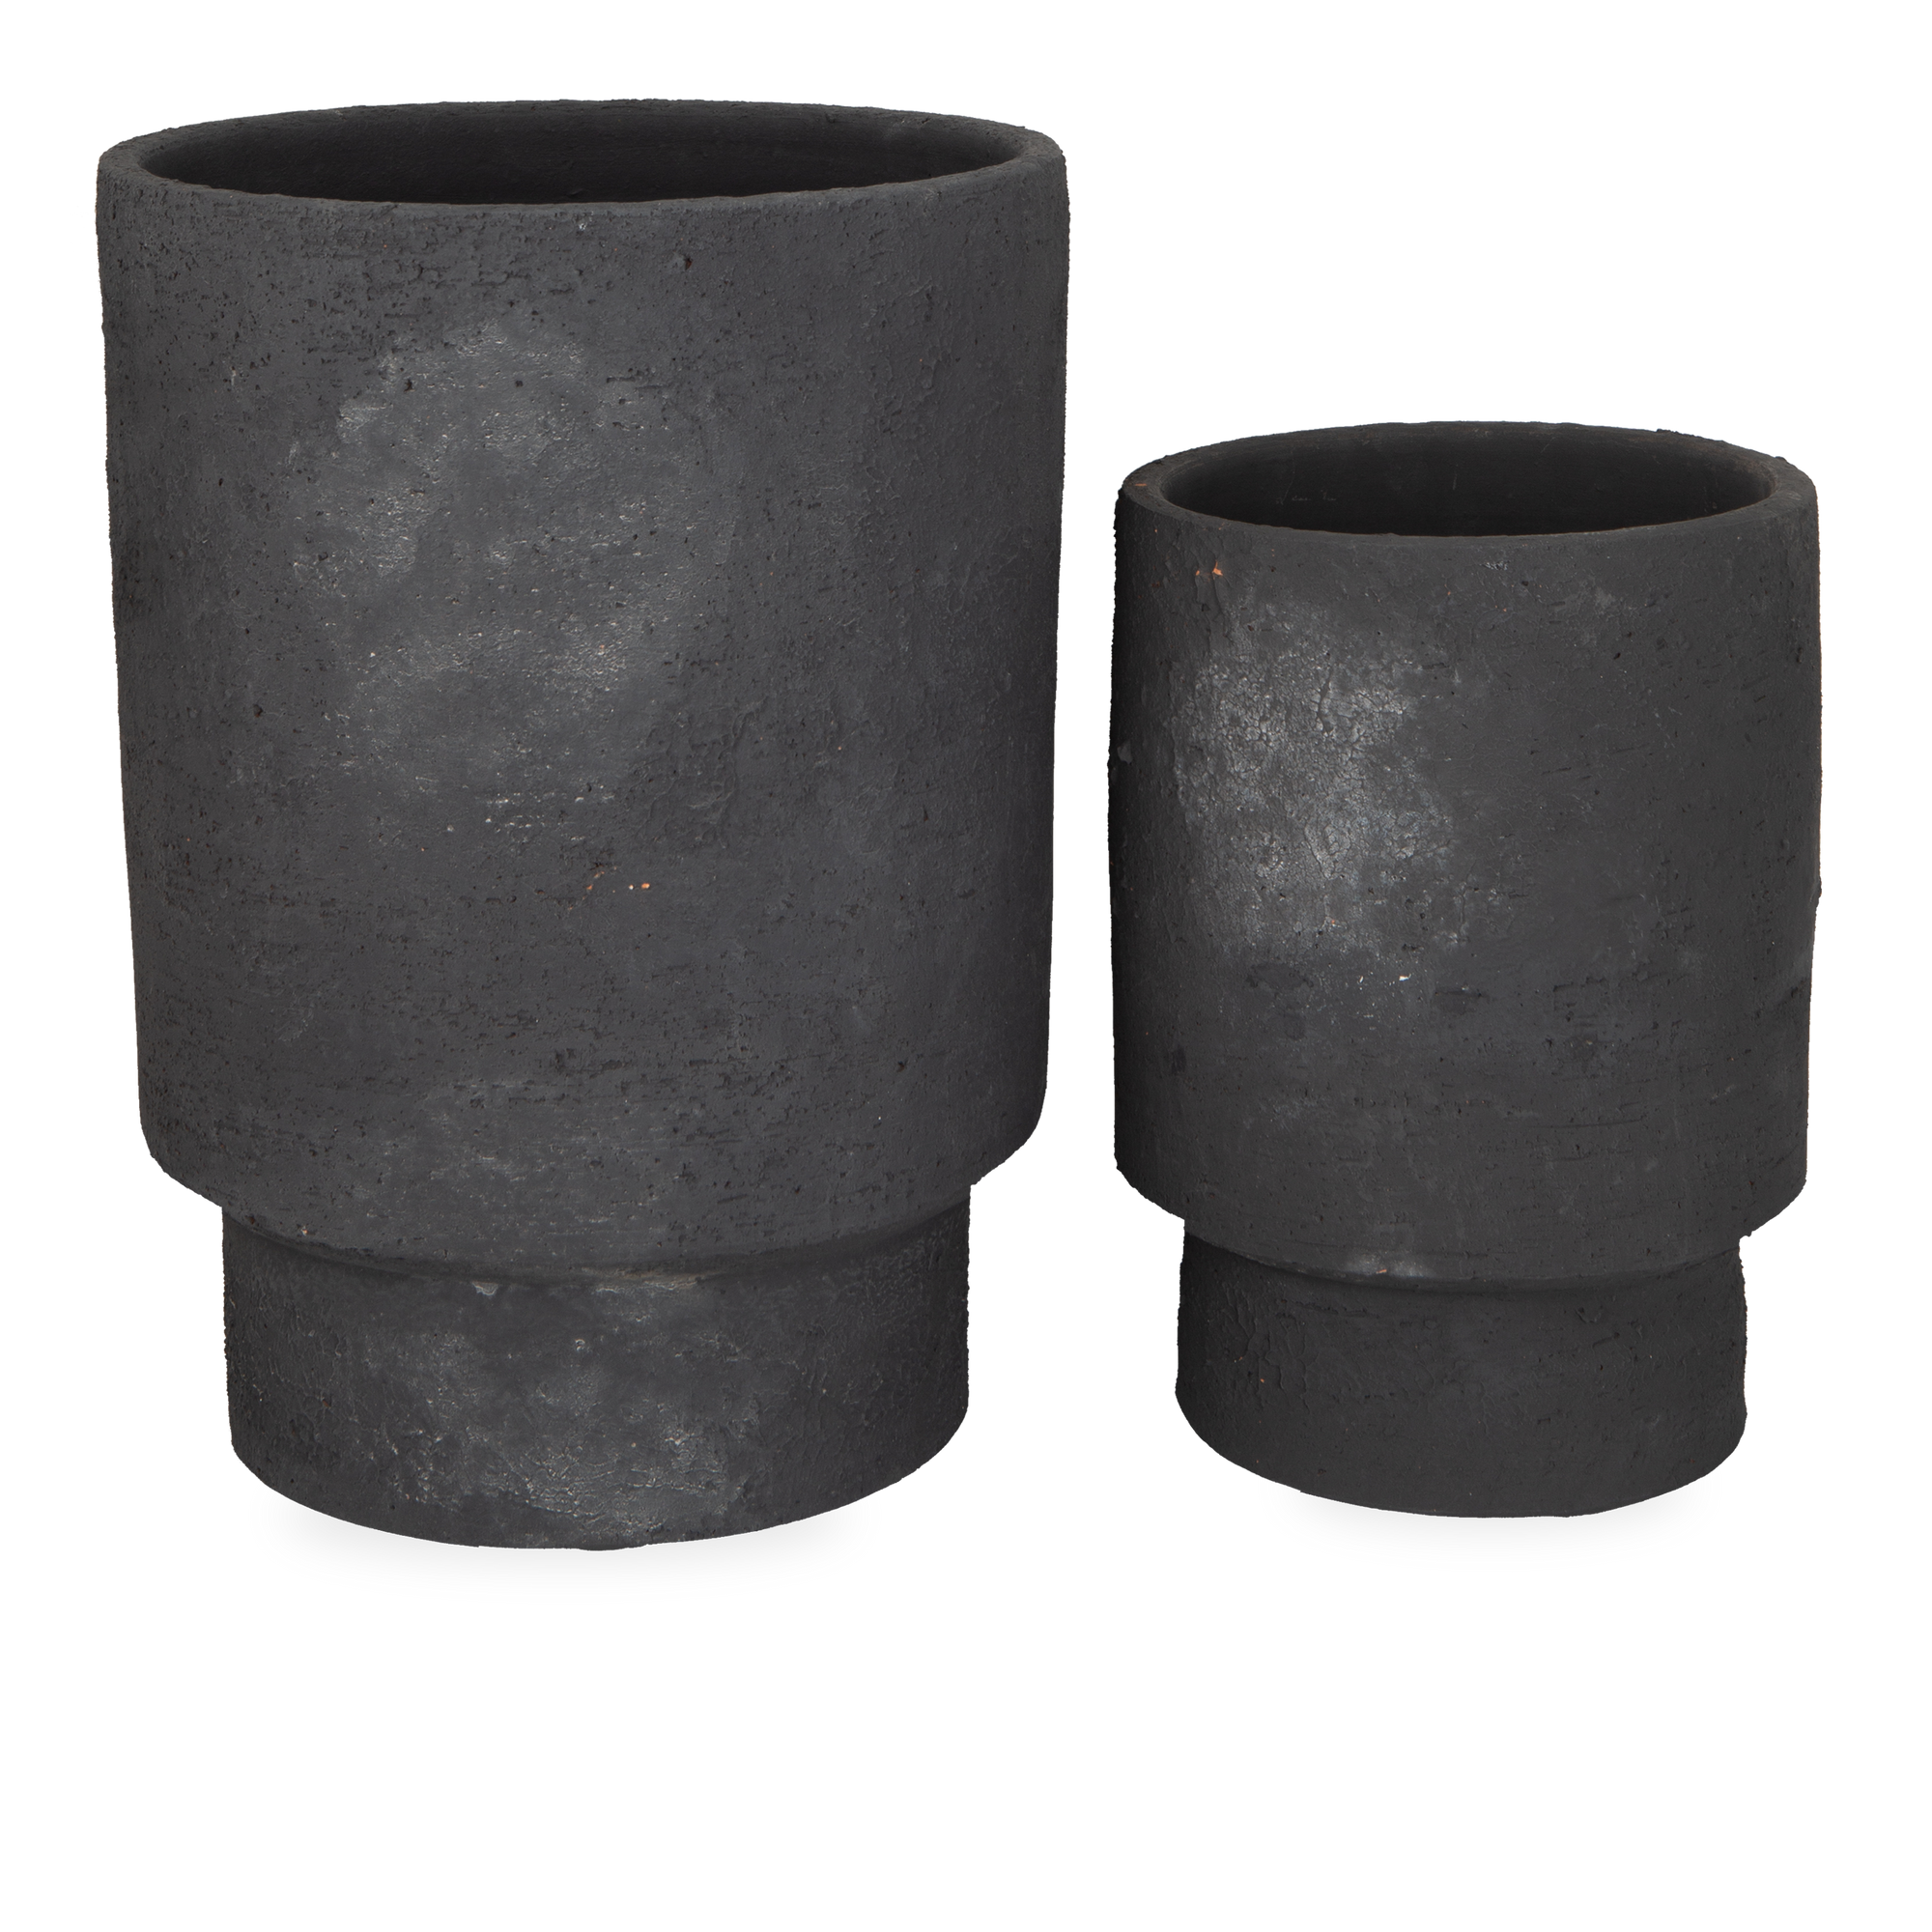 The Pitted Terracotta Vases feature texture and patina that is made of terracotta in a black finish.